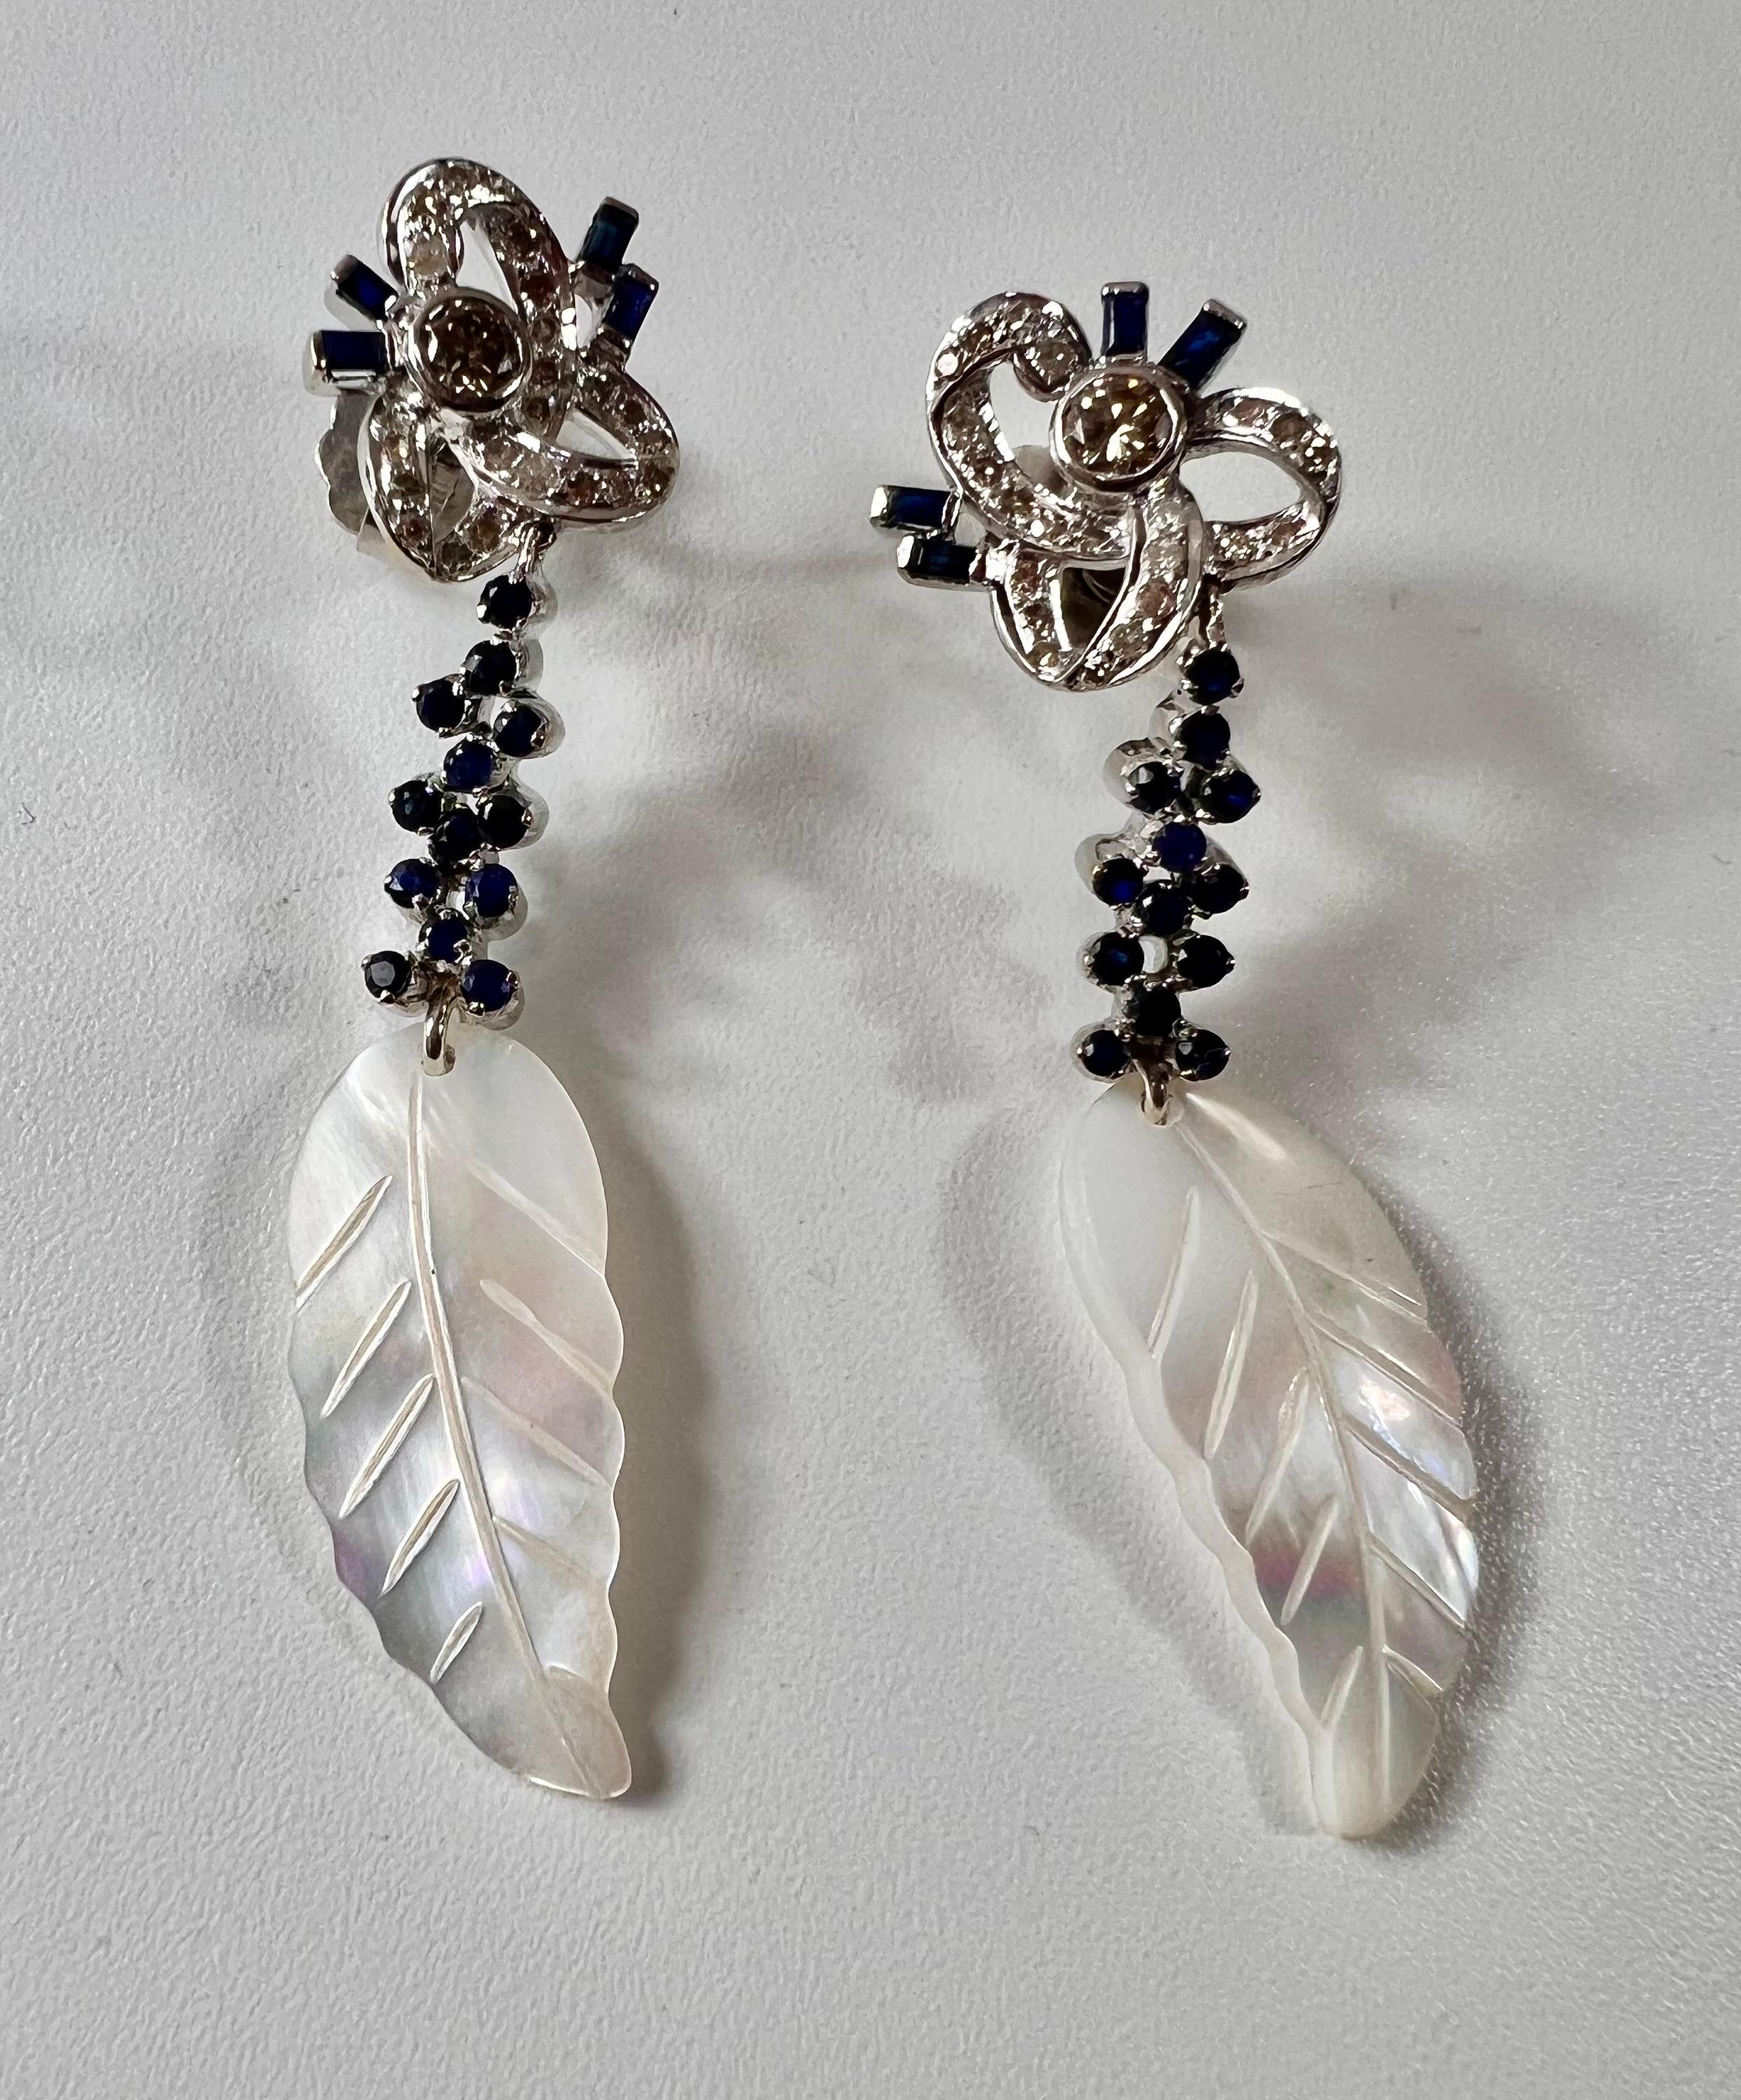 Long white gold earrings with a clean diamond, brilliant cut in chaton on openwork lacing in a row of diamonds and articulated cascade pendant of sapphires in claws
and mother of pearl feather 
Weight  9 grams
Length 32mm
2 bts  0,40 ct aprox total